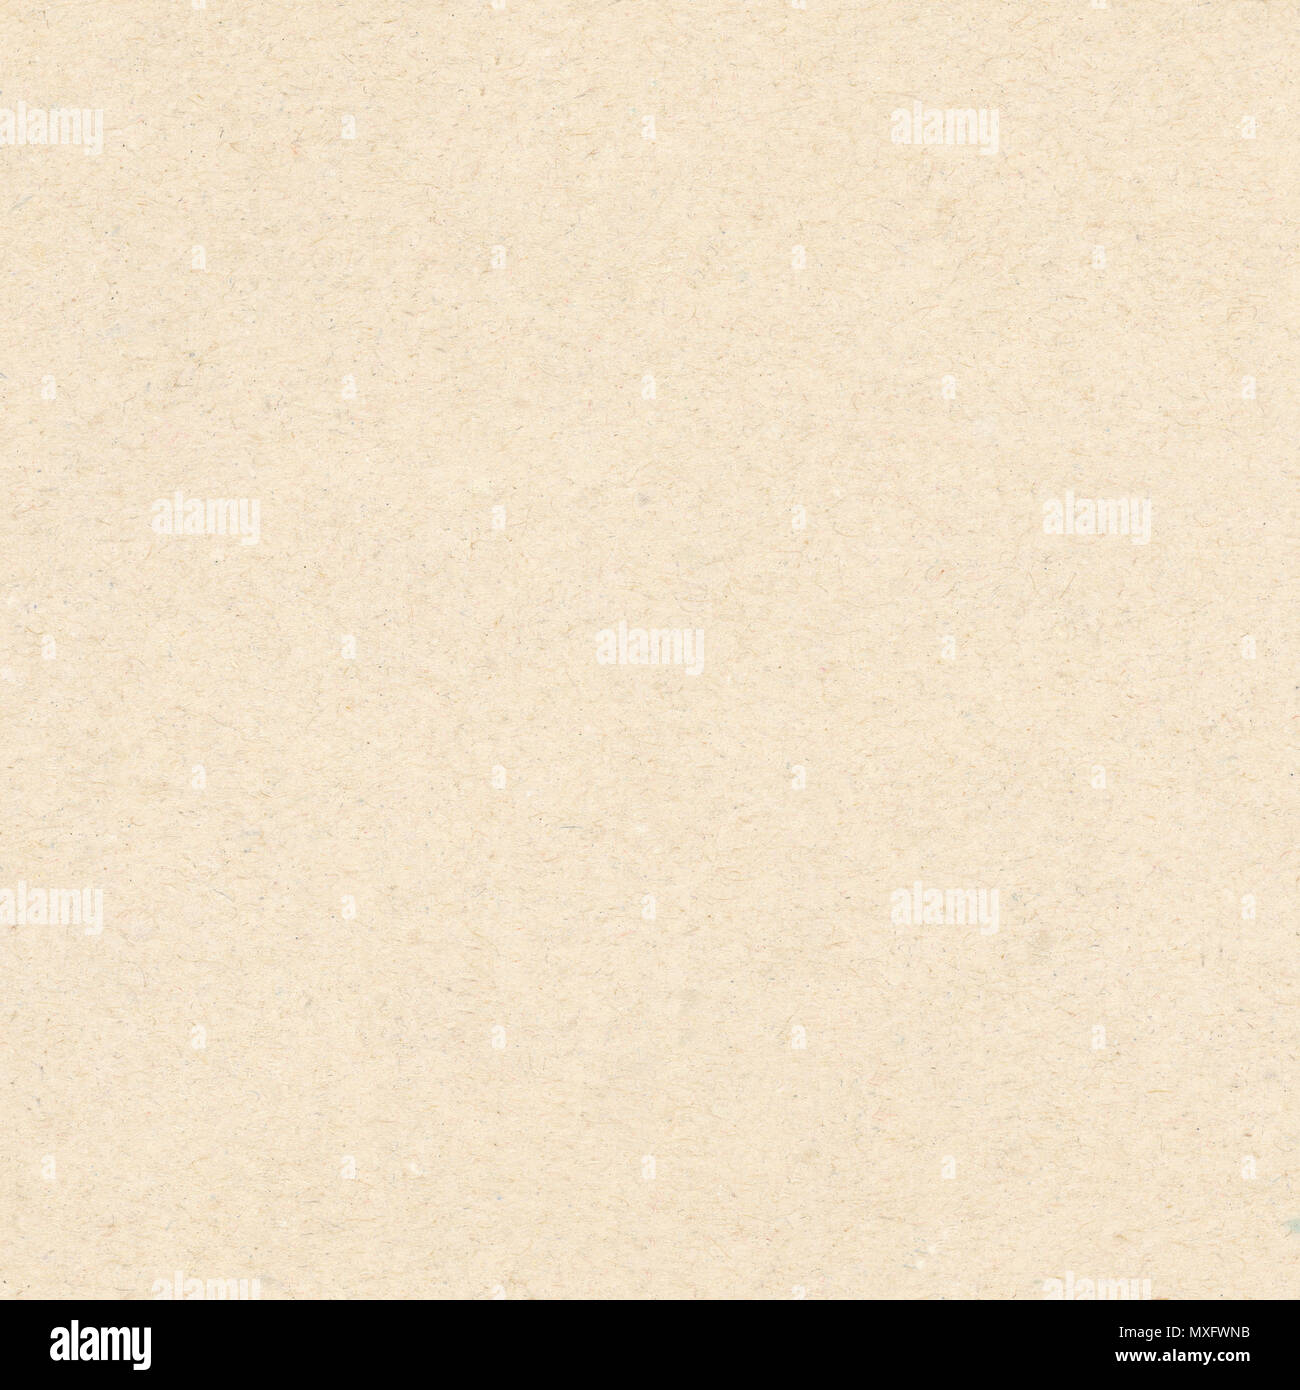 Recycled paper texture background Stock Photo - Alamy